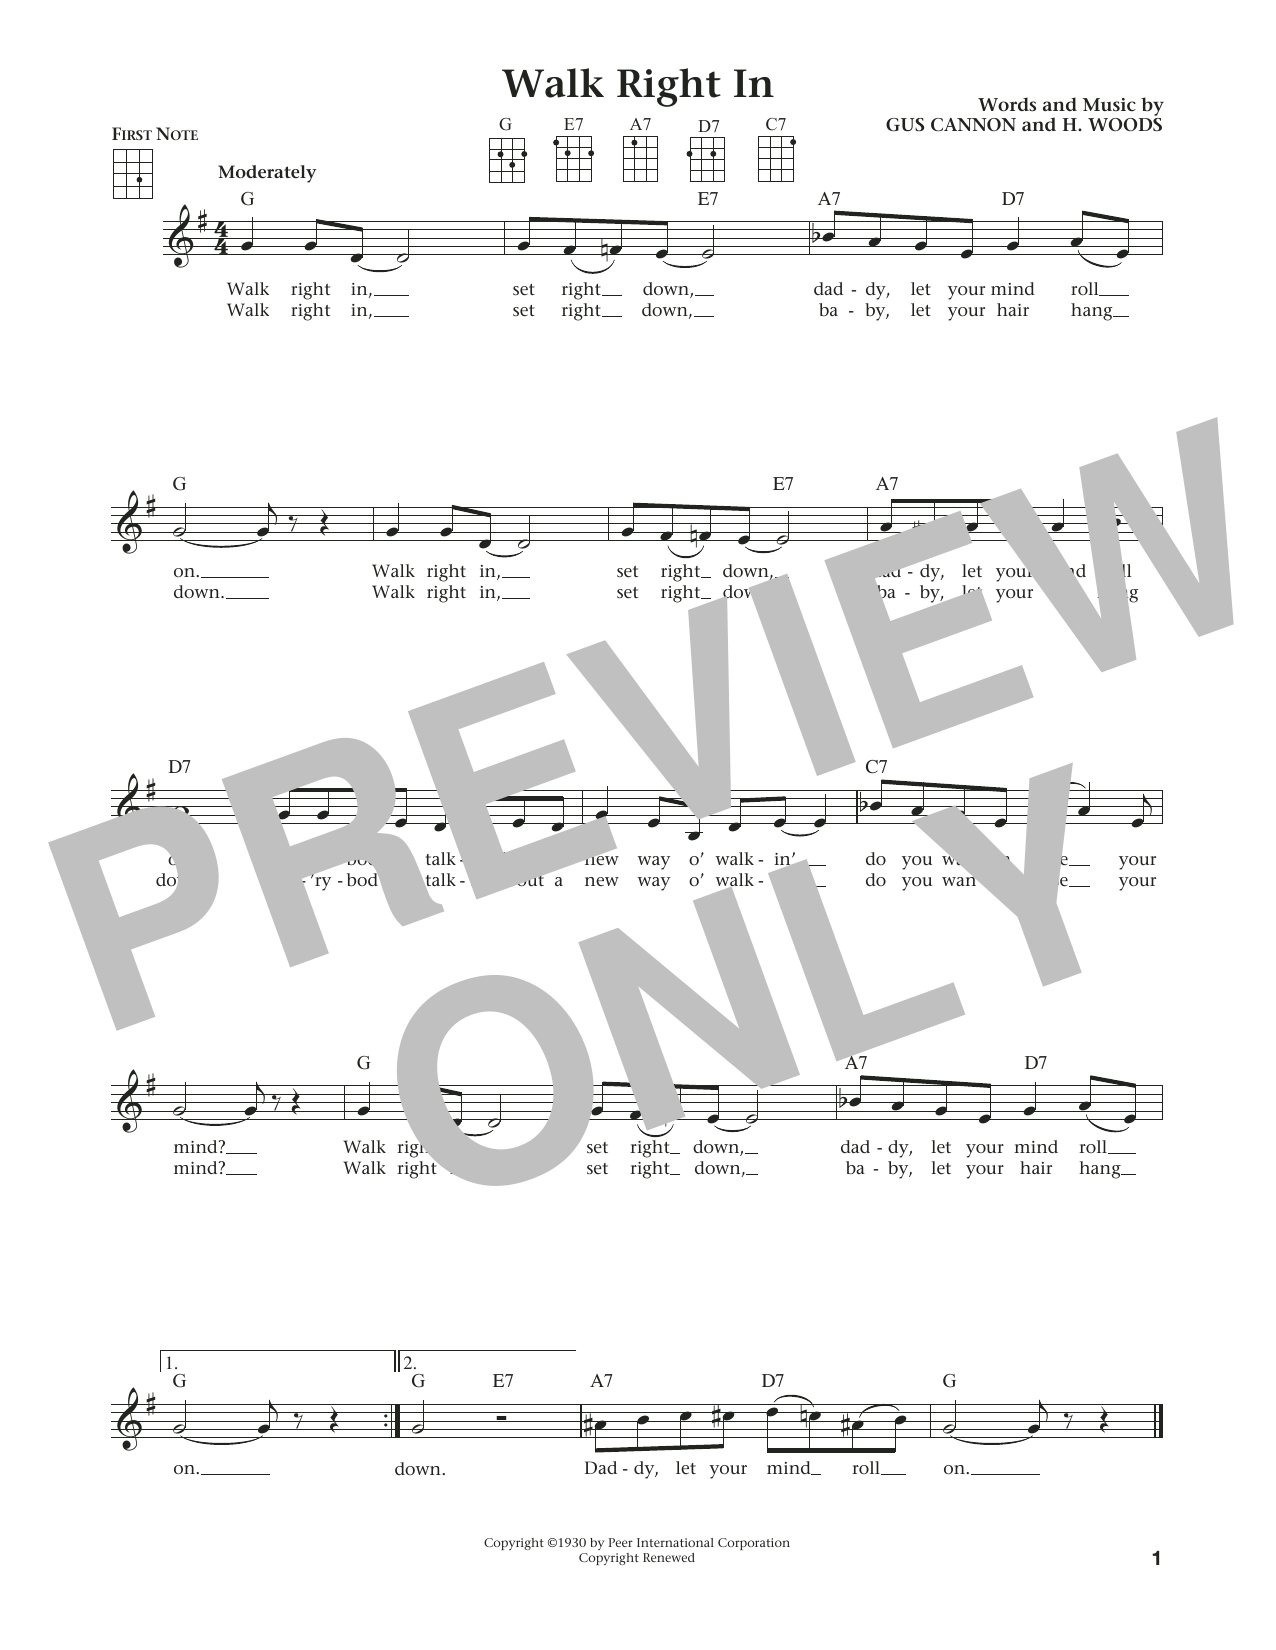 Download The Rooftop Singers Walk Right In (from The Daily Ukulele) Sheet Music